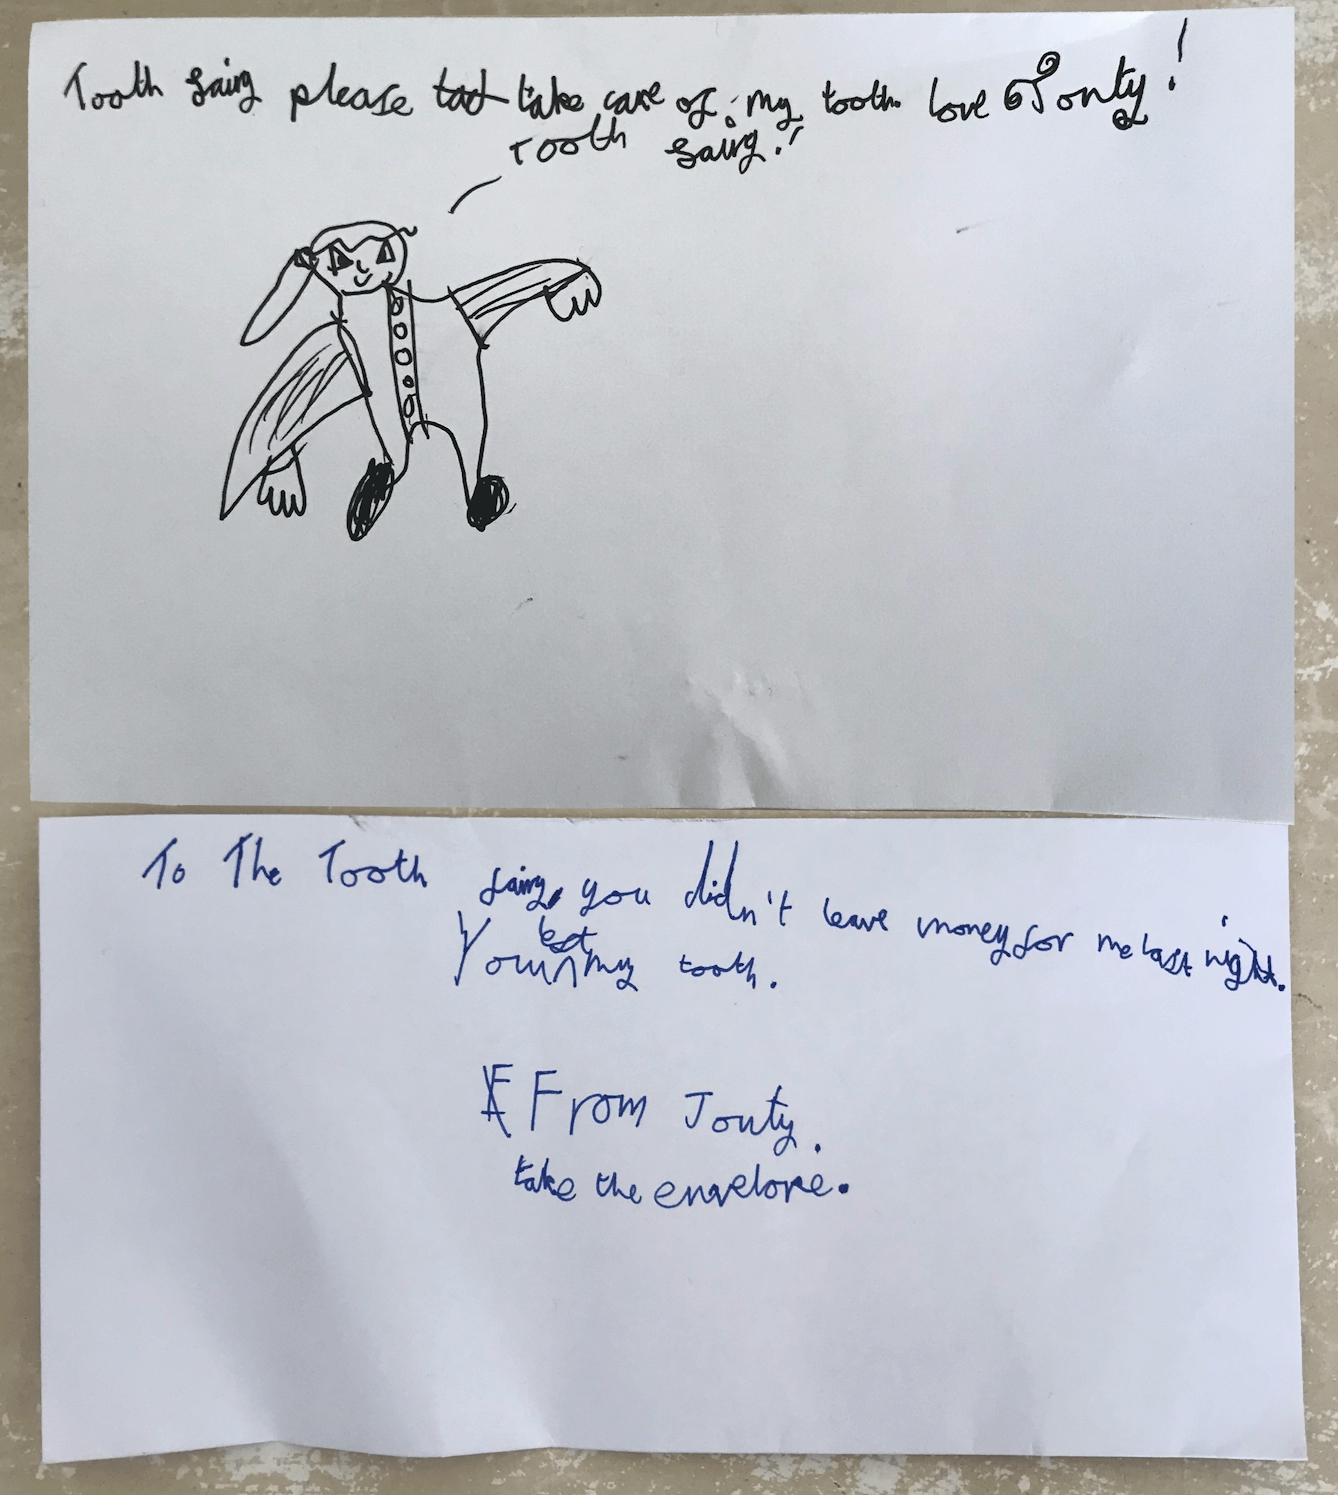 Letter written in black ink on the front of a white piece of paper and blue ink on the reverse. Has an illustration of a woman with what could be wings, with her hair in a pony tail and buttons down her front. Letter front reads: Tooth Fairy, please take care of my tooth, love Jonty! Letter reverse reads: To the Tooth Fairy. you didn't leave money for me last night. You kept my tooth. From Jonty. Take the envelope.